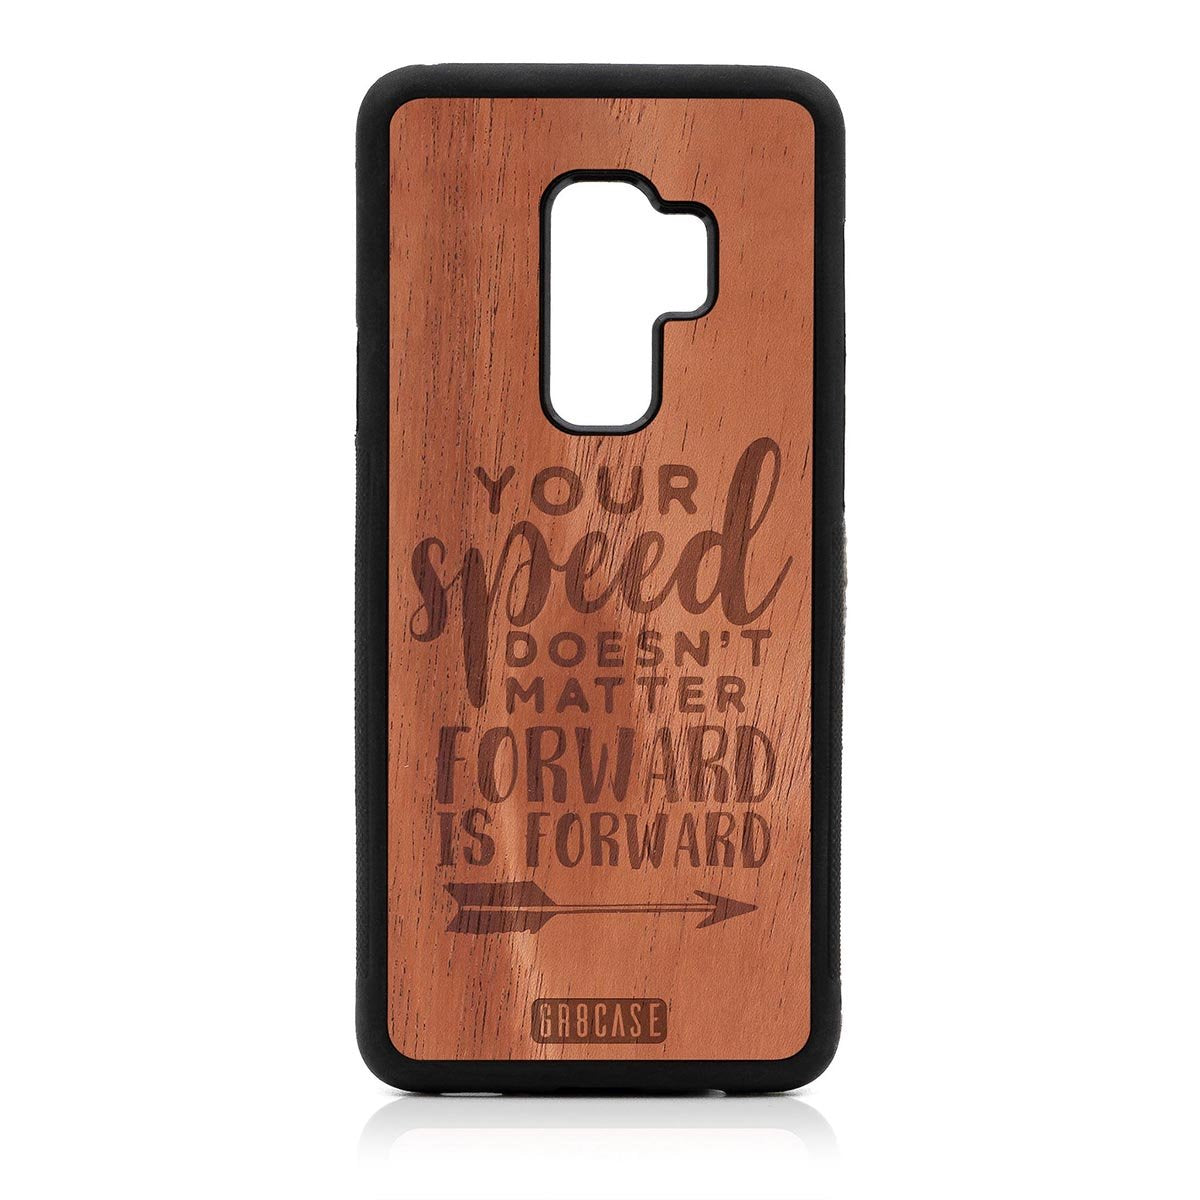 Your Speed Doesn't Matter Forward Is Forward Design Wood Case Samsung Galaxy S9 Plus